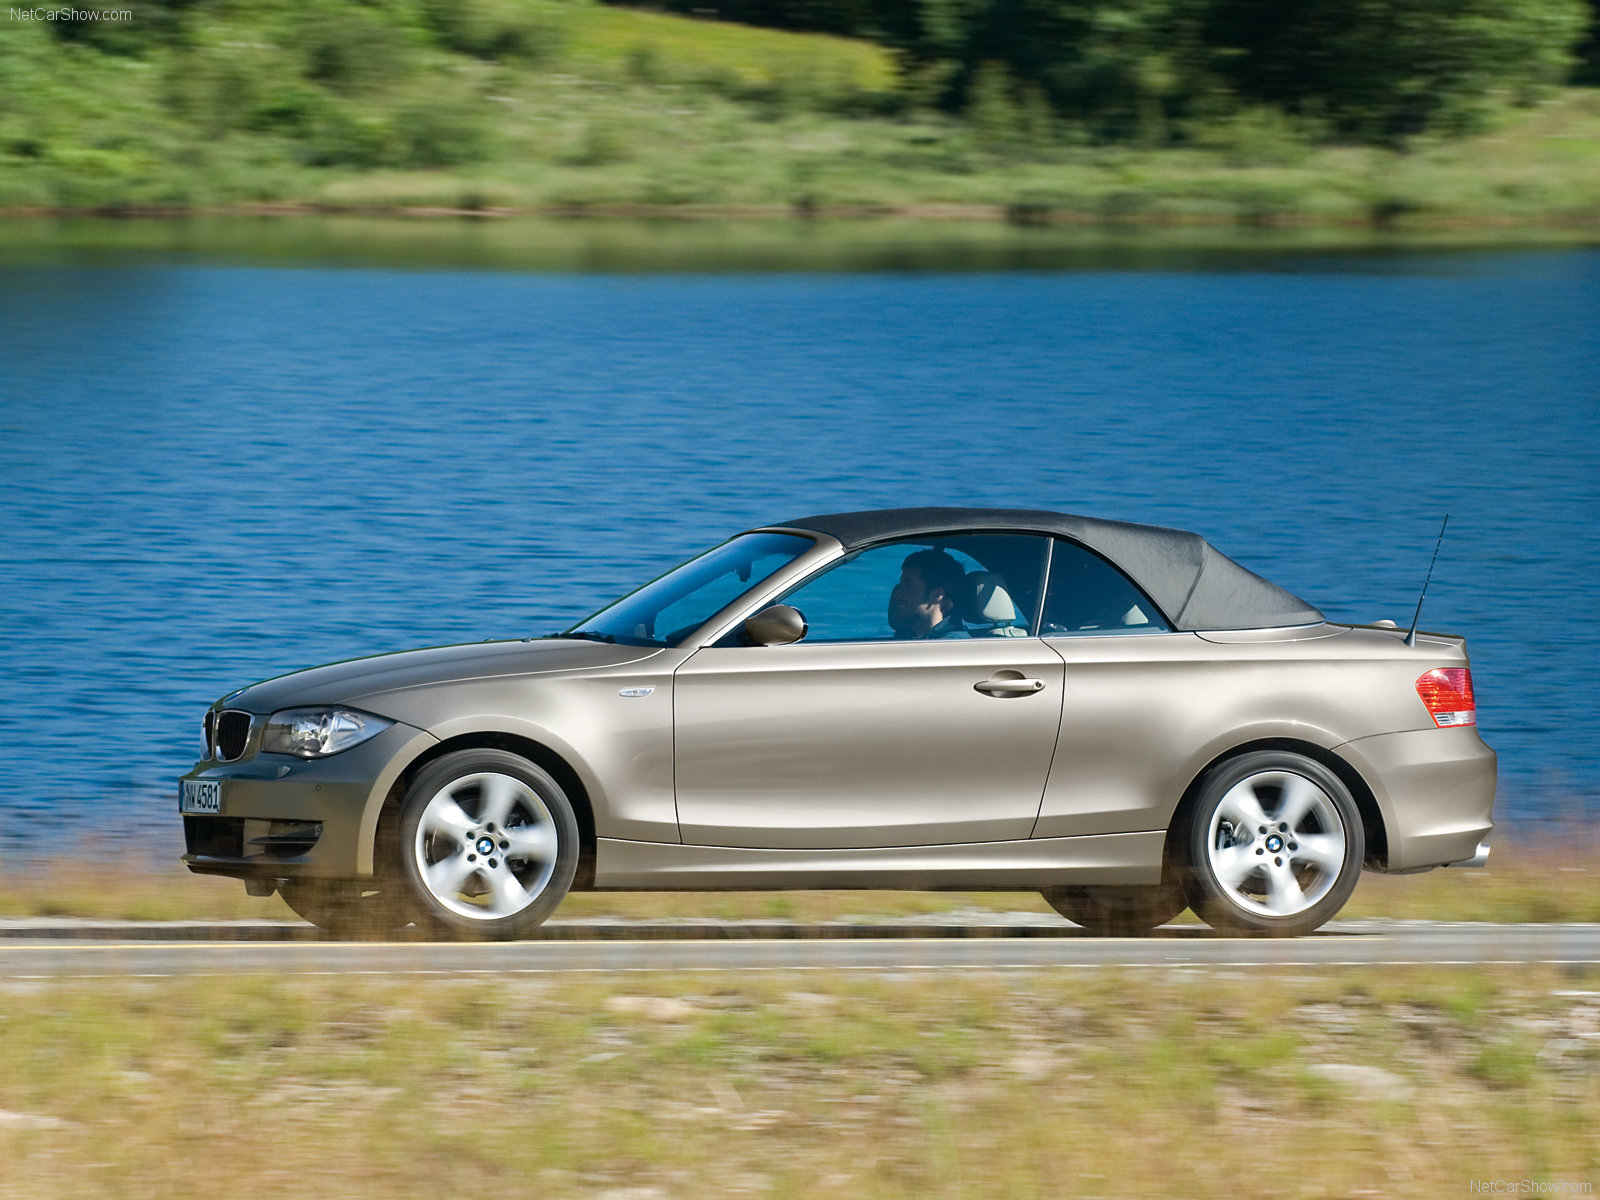 You can vote for this BMW 1-series Cabrio E88 photo